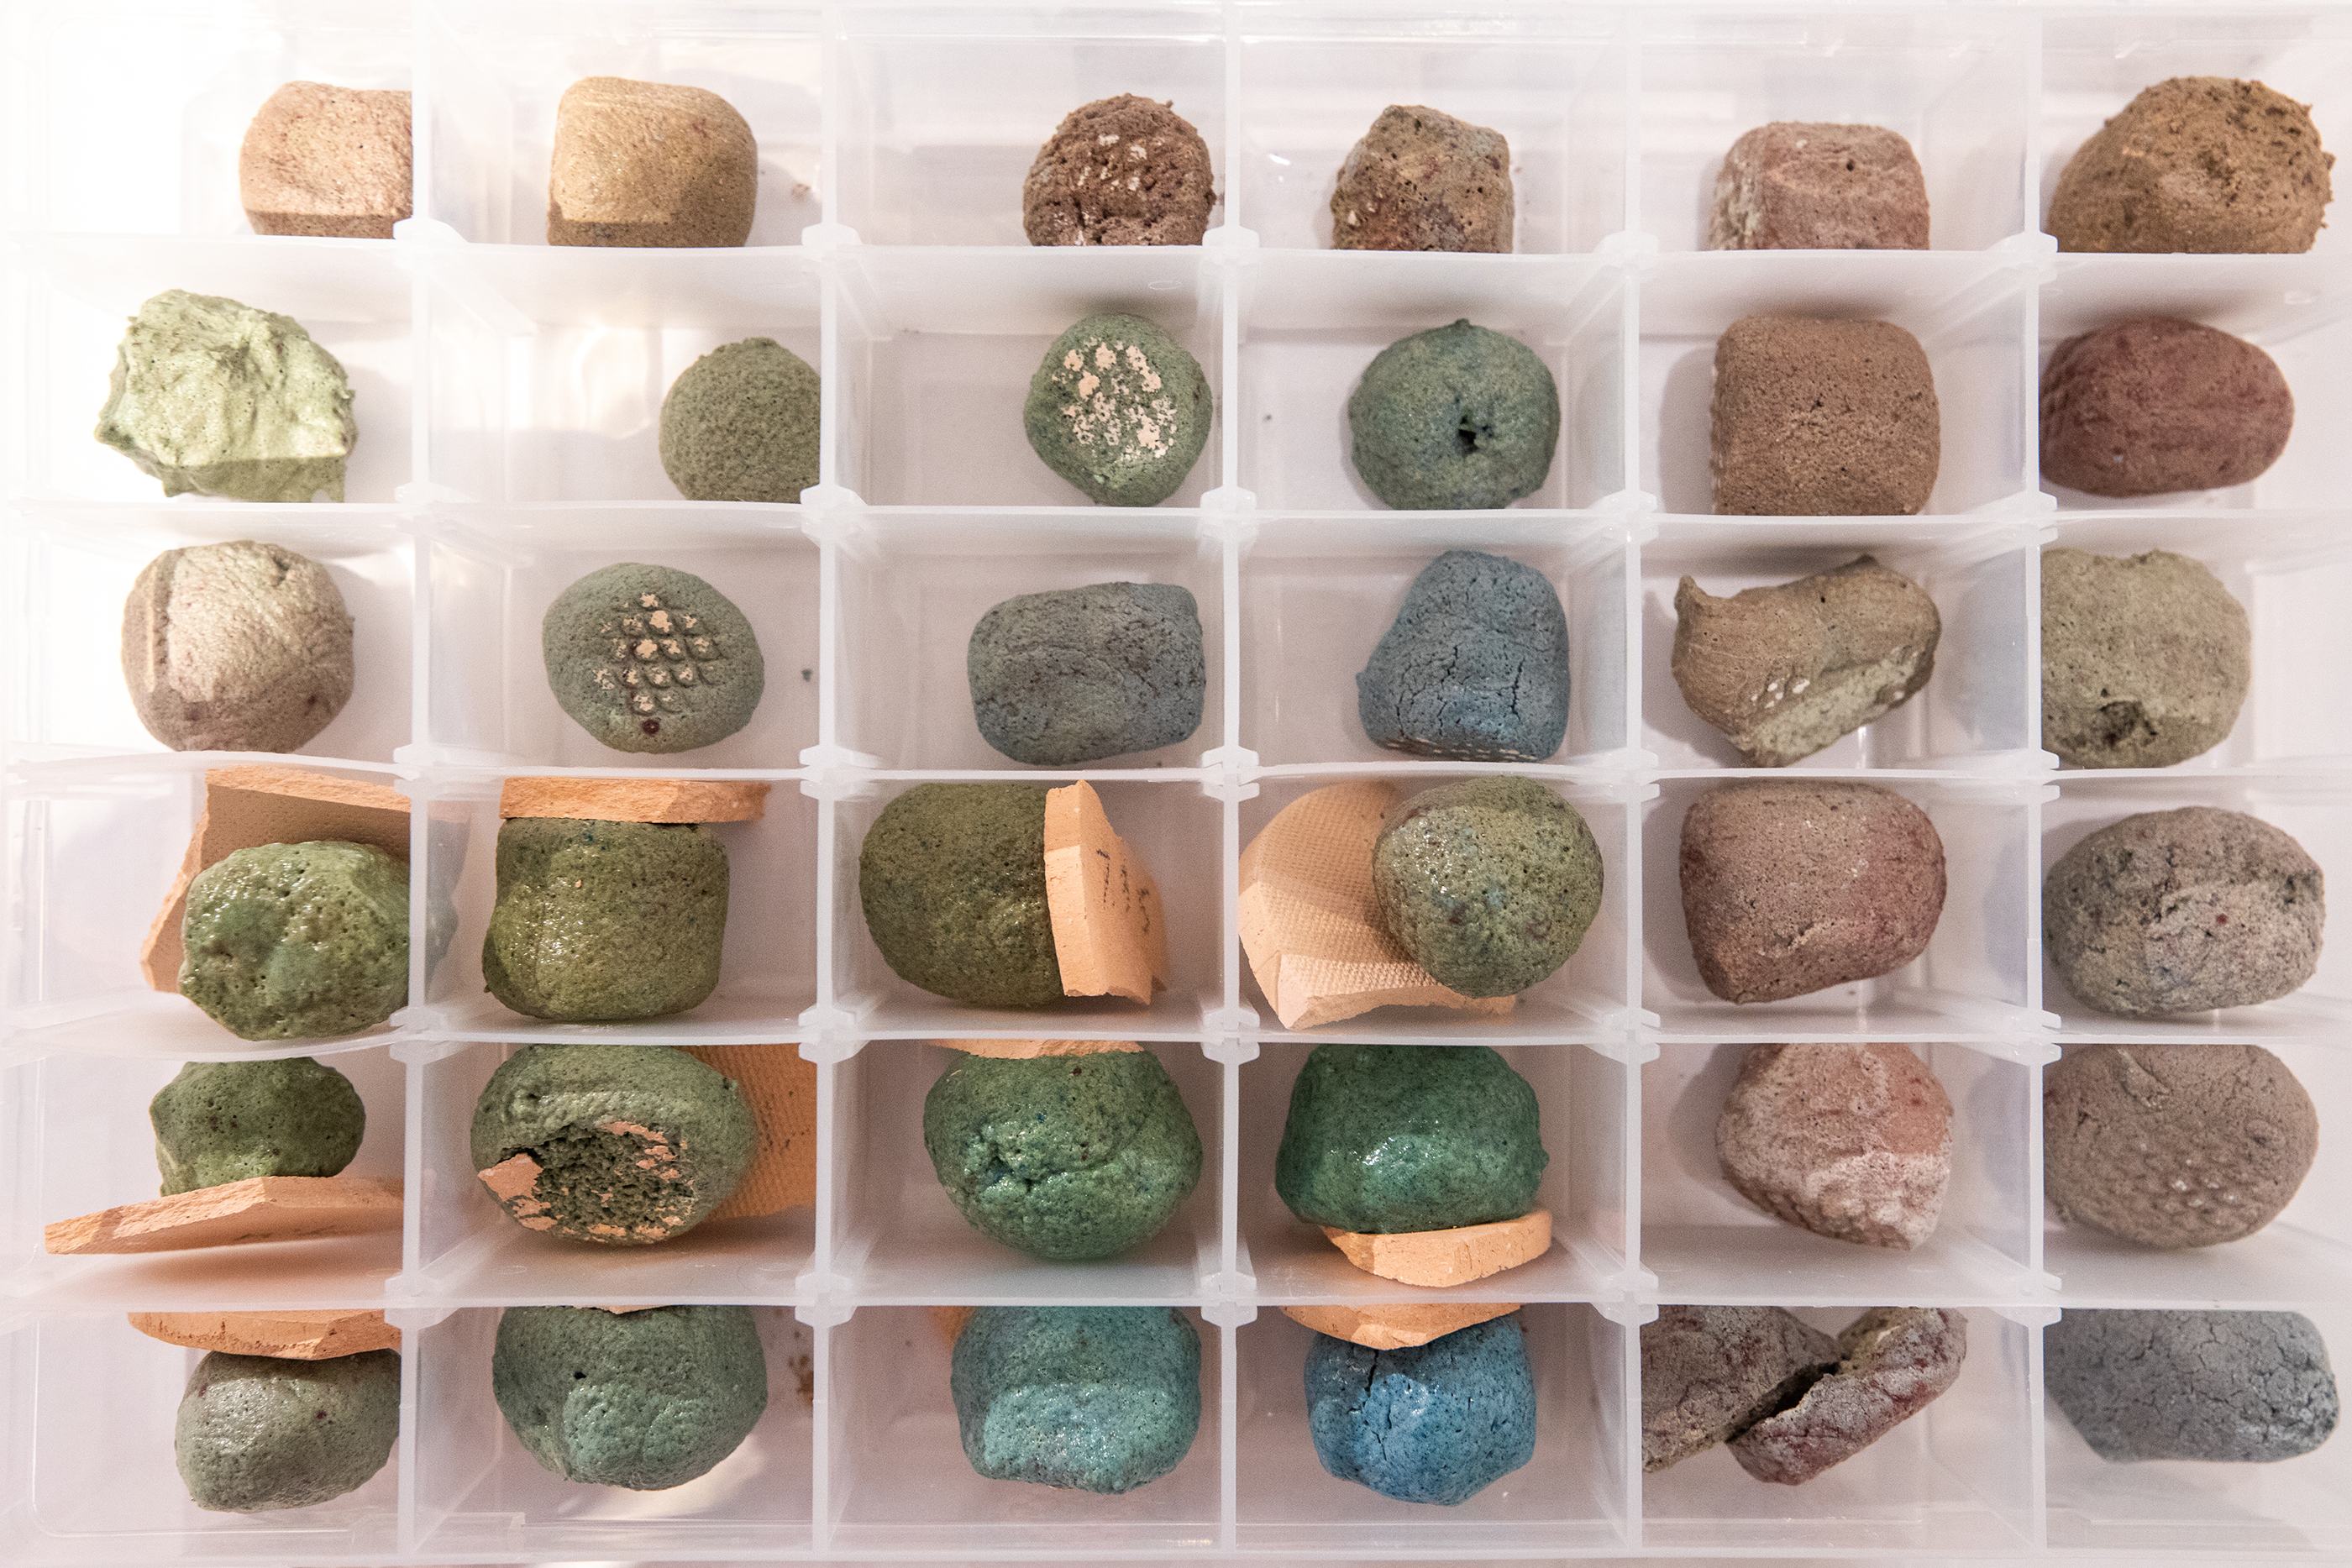 a box with many compartments containing ceramics samples